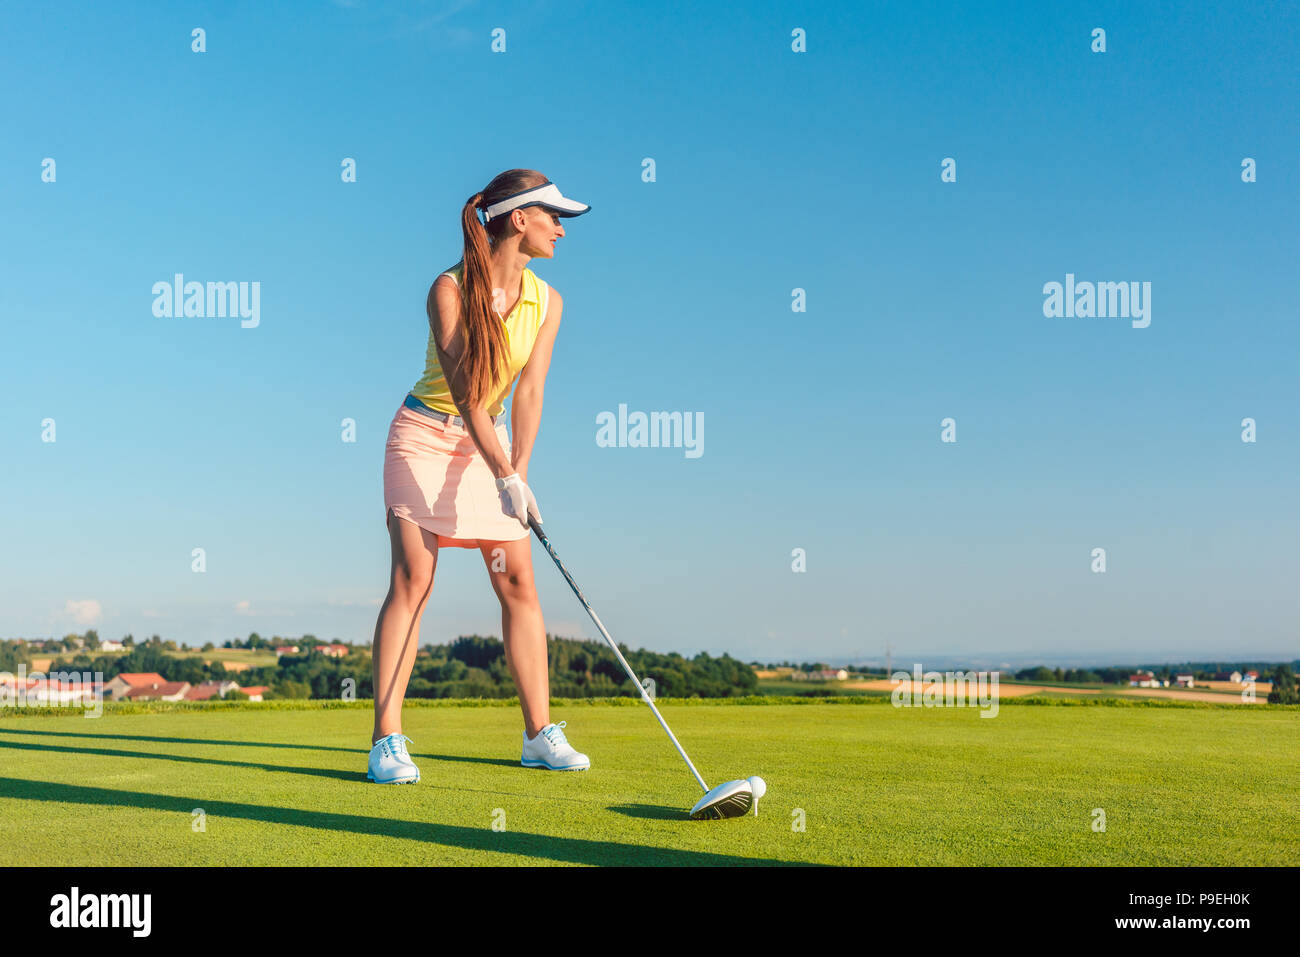 Professional female golf player smiling while swinging a driver club Stock Photo